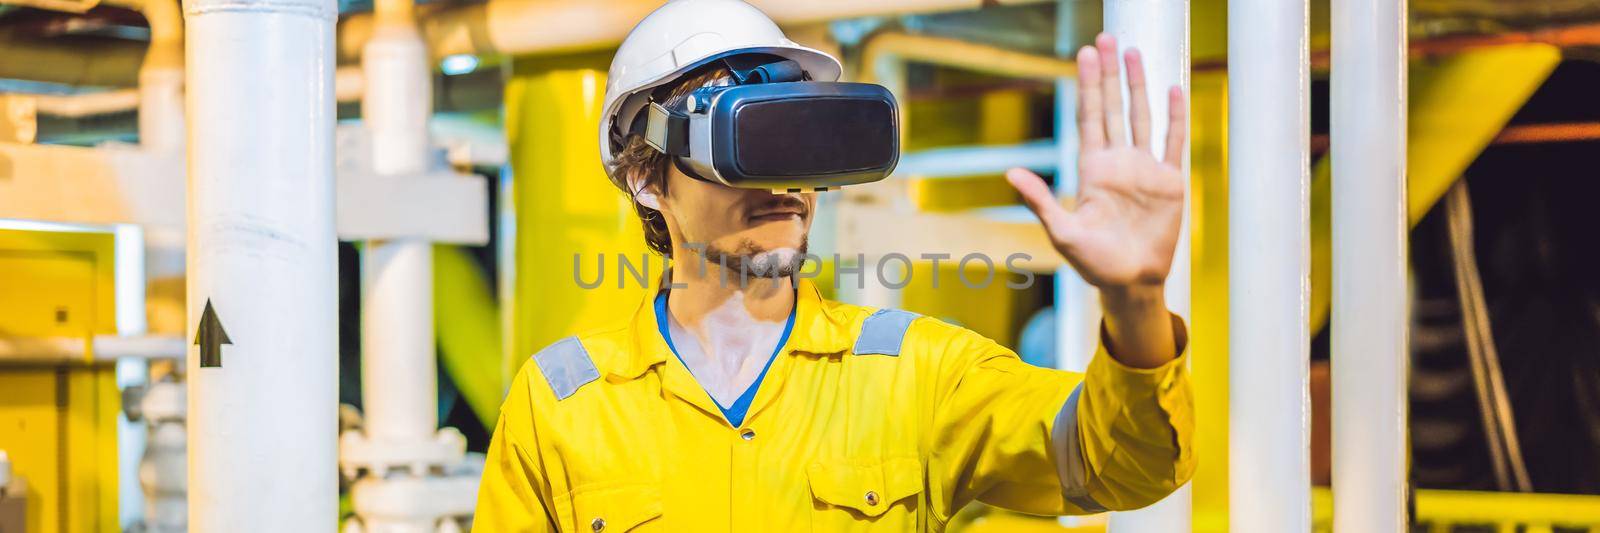 BANNER, LONG FORMAT Young woman in a yellow work uniform, glasses and helmet uses virtual reality glasses in industrial environment, oil Platform or liquefied gas plant by galitskaya